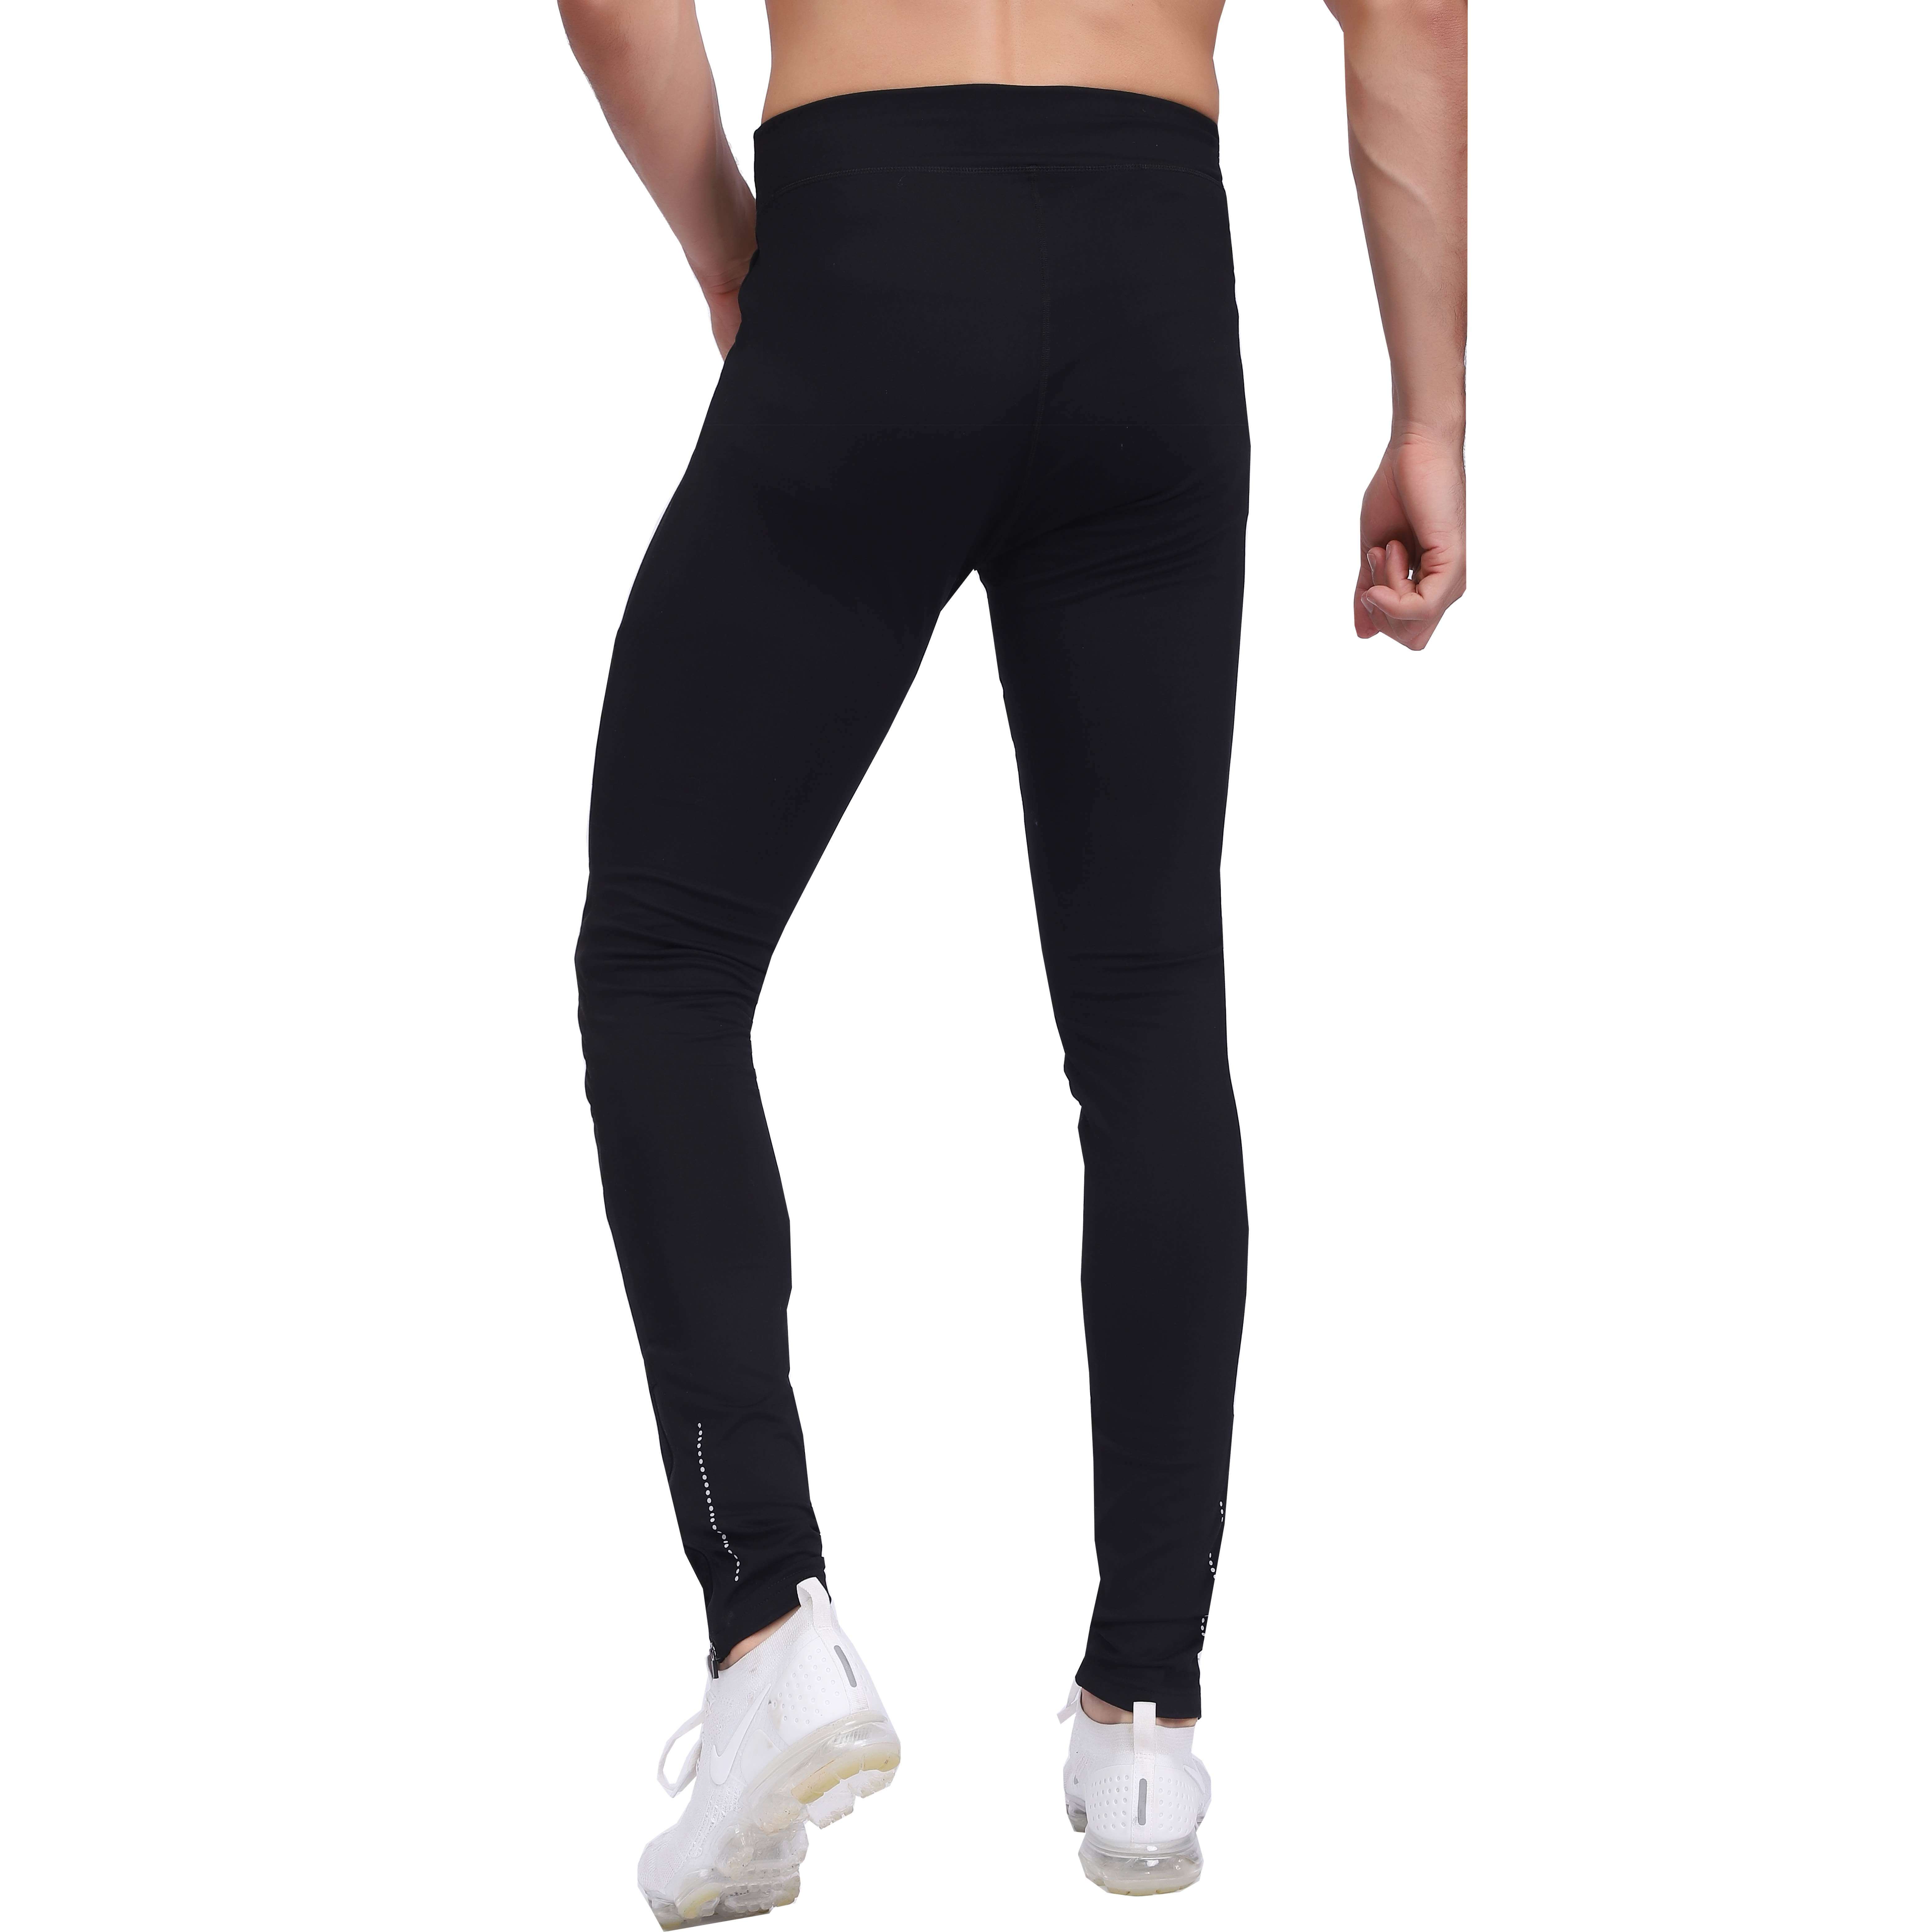 Men's High Waist Thermal Underwear Knee Padded Tight Leggings With Crotch Gusset